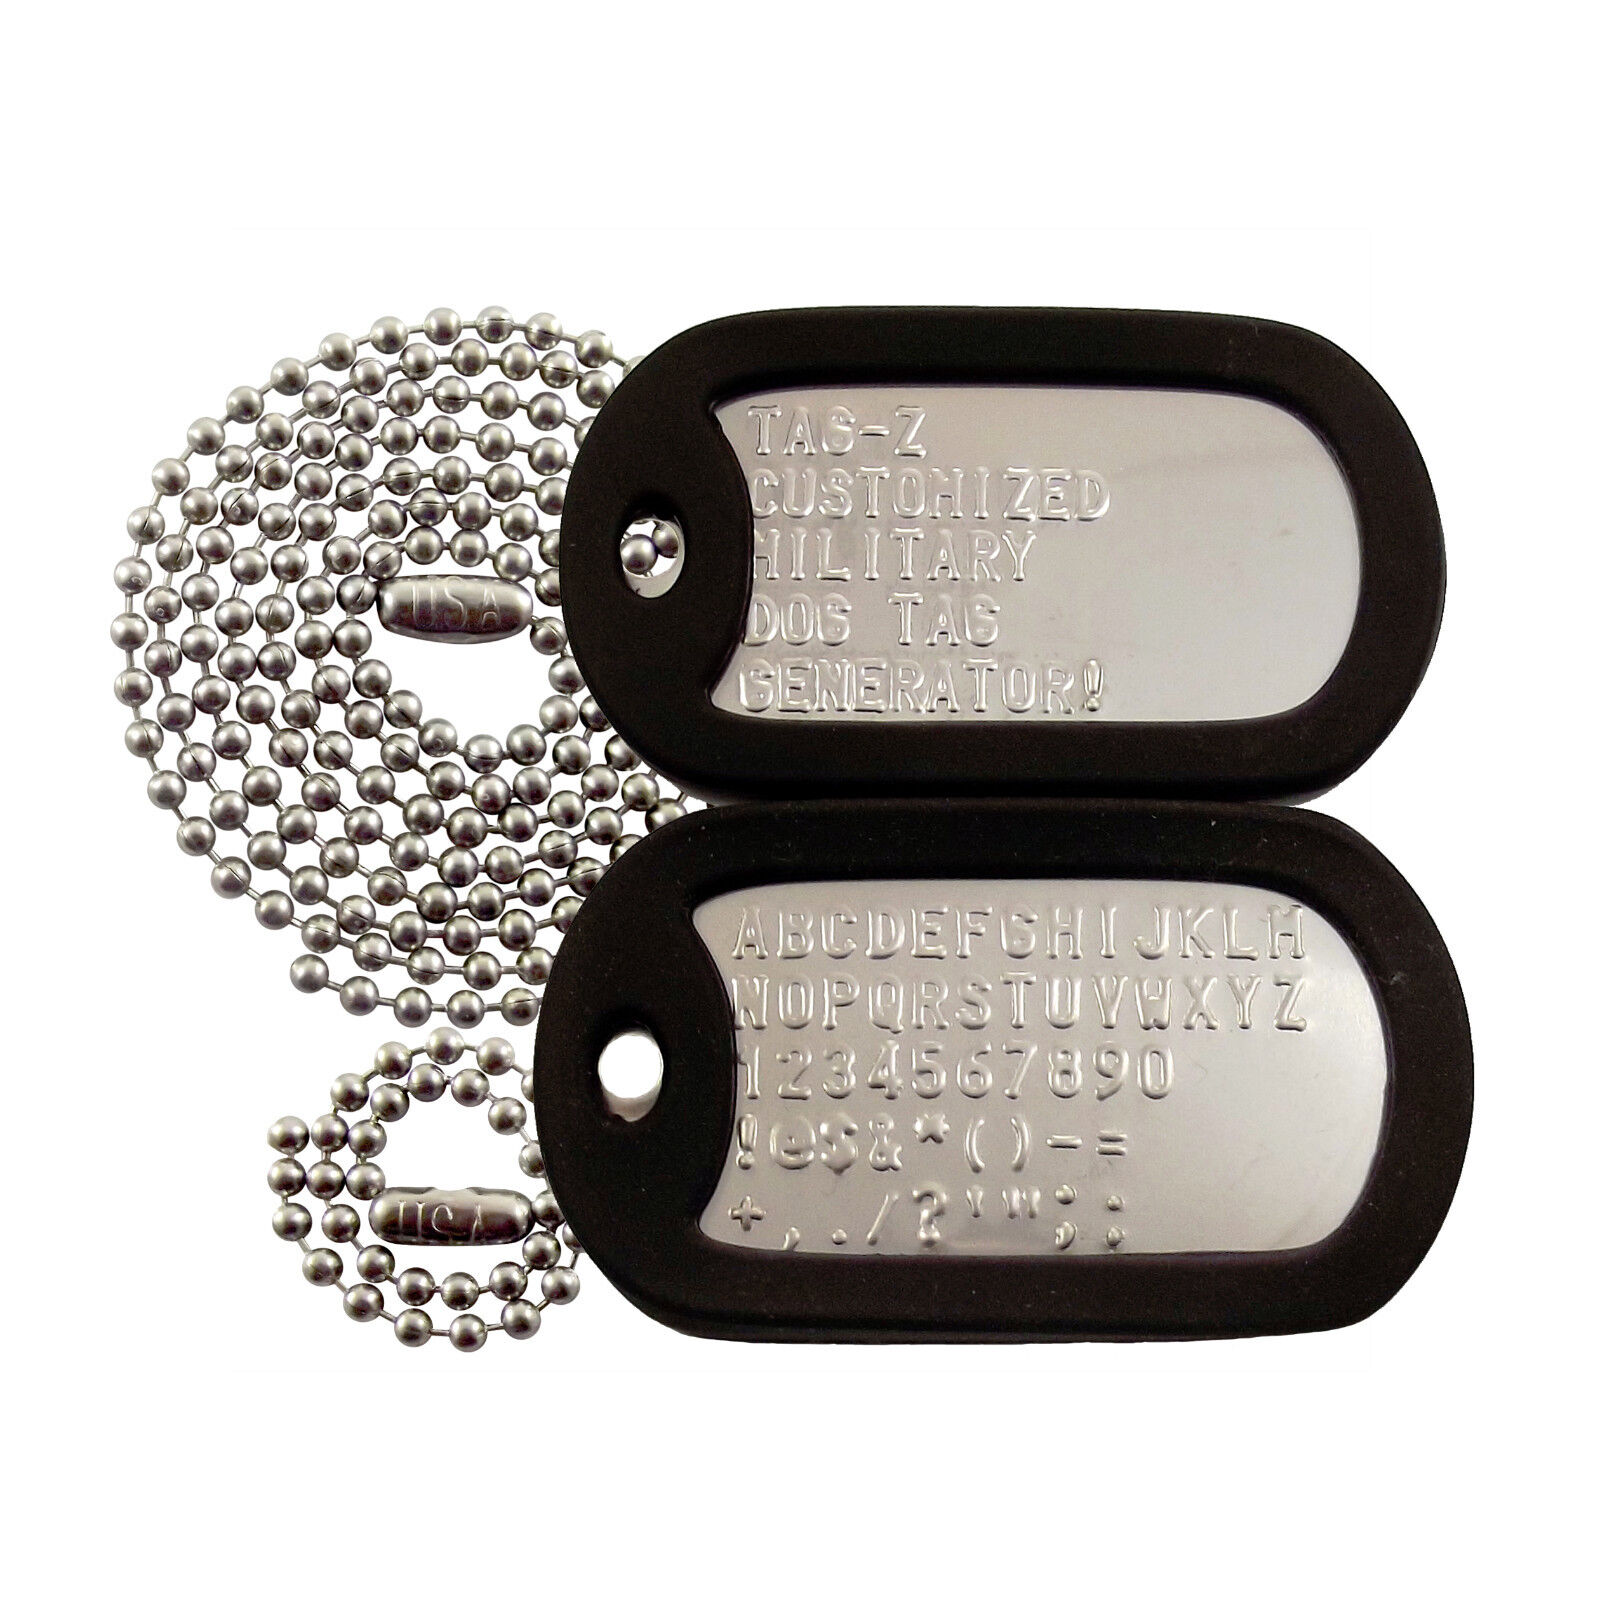 2 Military Dog Tags - Custom Embossed Stainless - GI Identification w/ Silencers